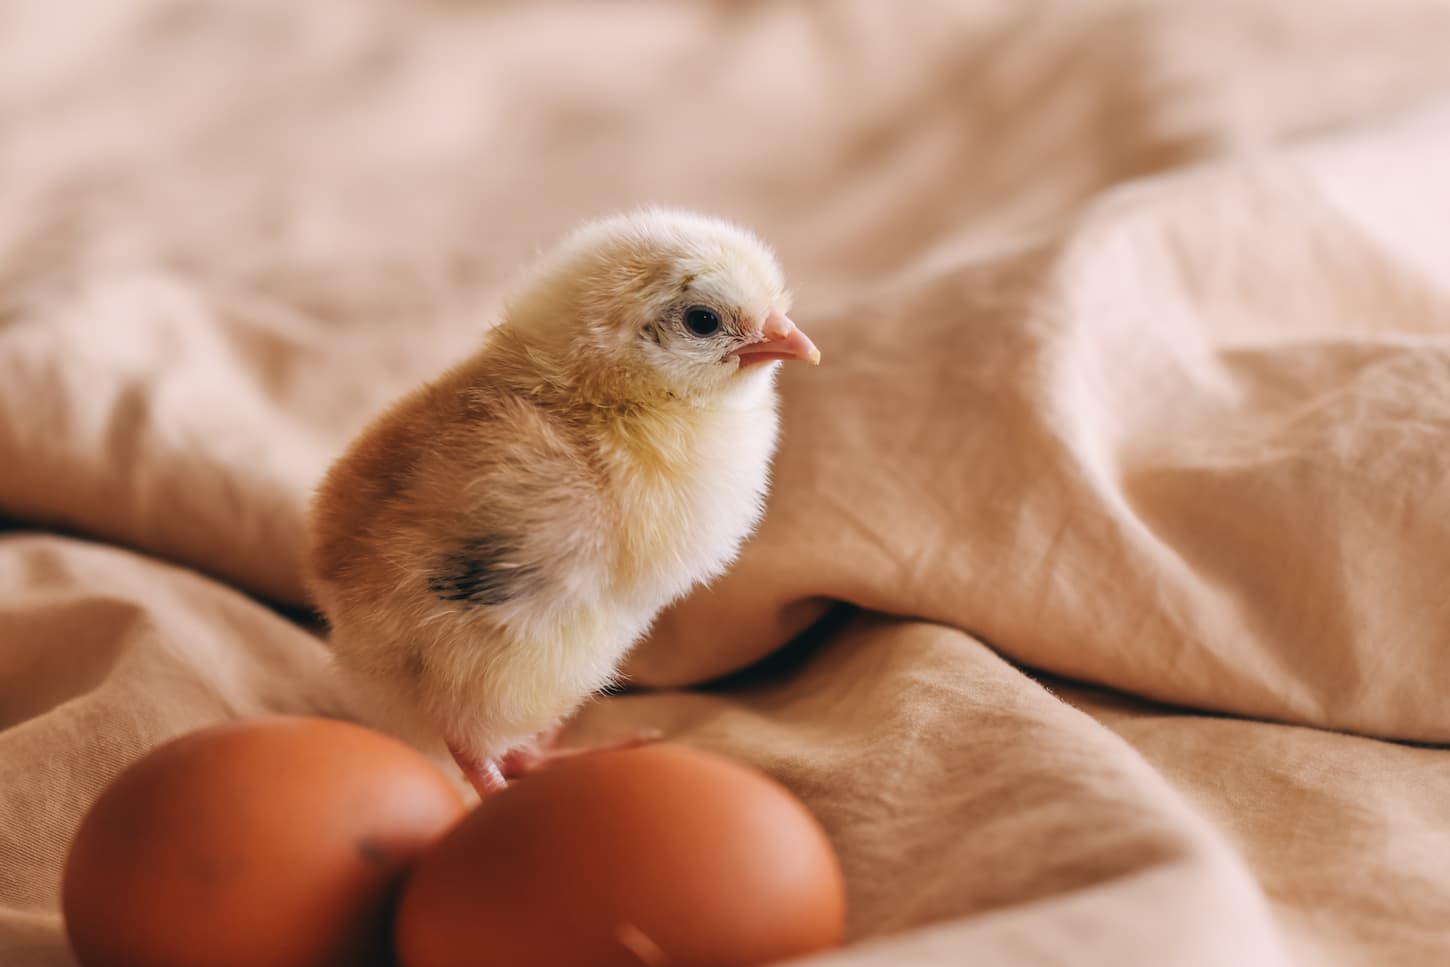 An image of chicken and two eggs.